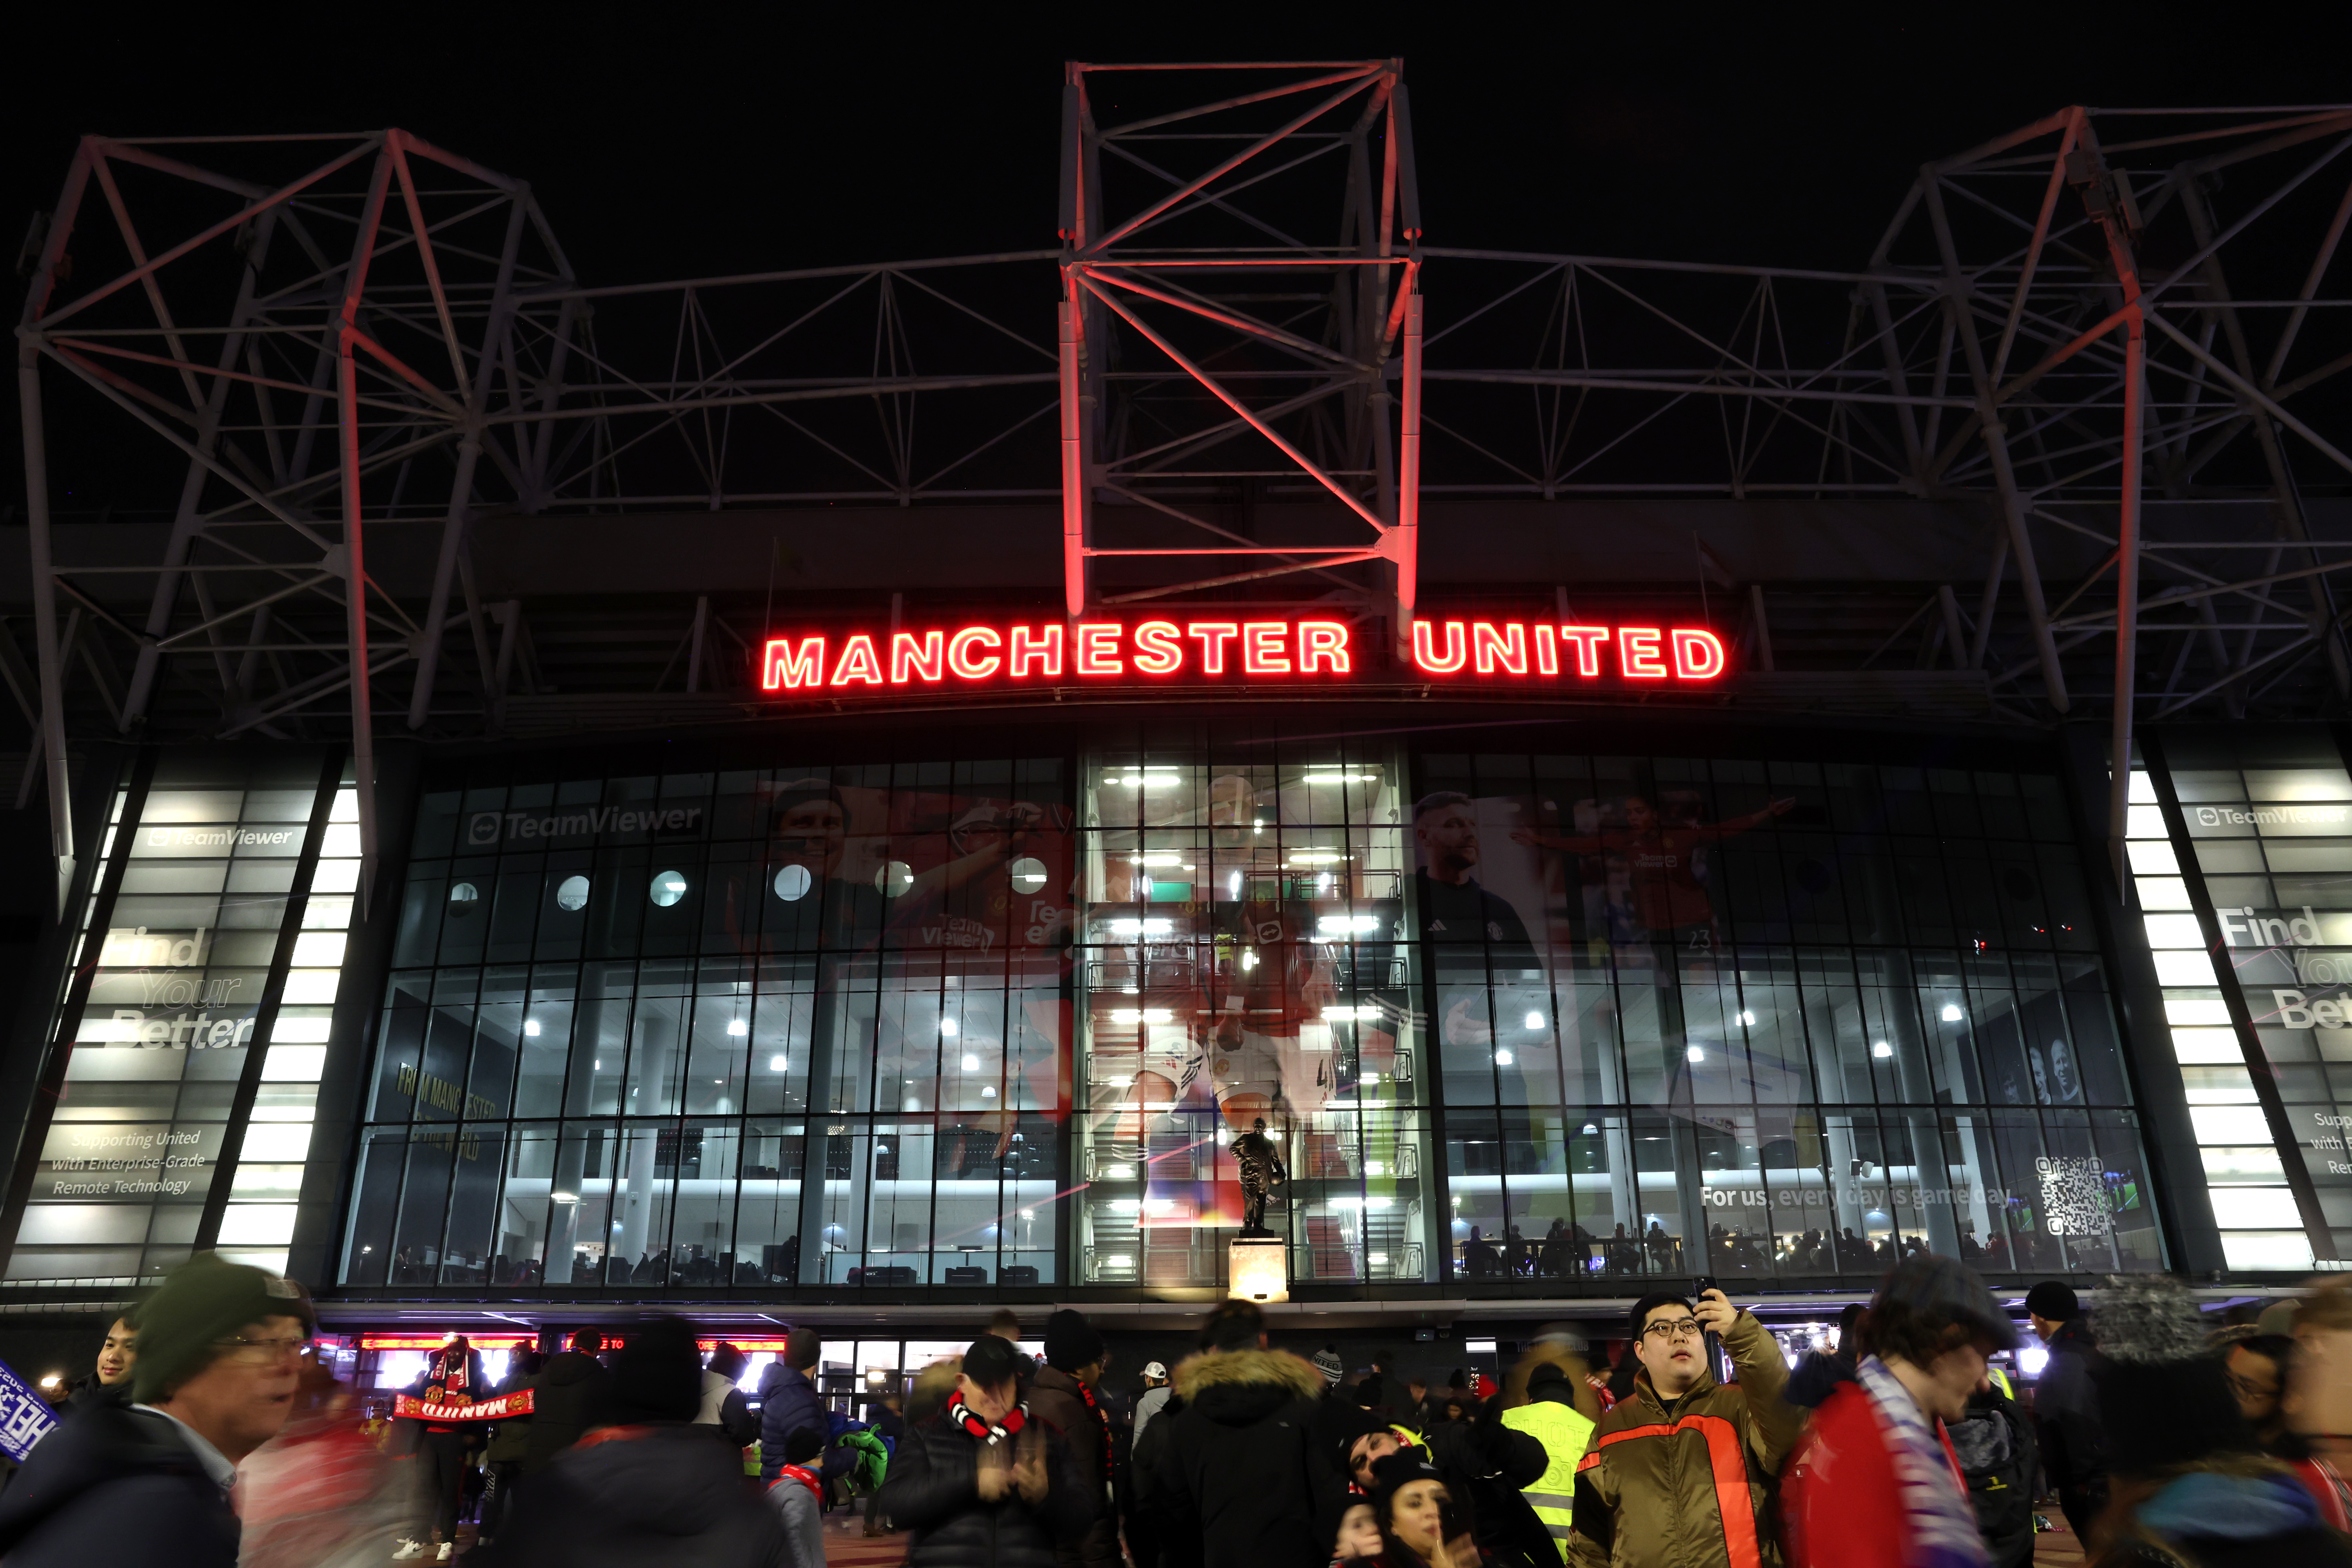 It might seem like neon light years away from today's world but Old Trafford as it is now could be much changed by 2123